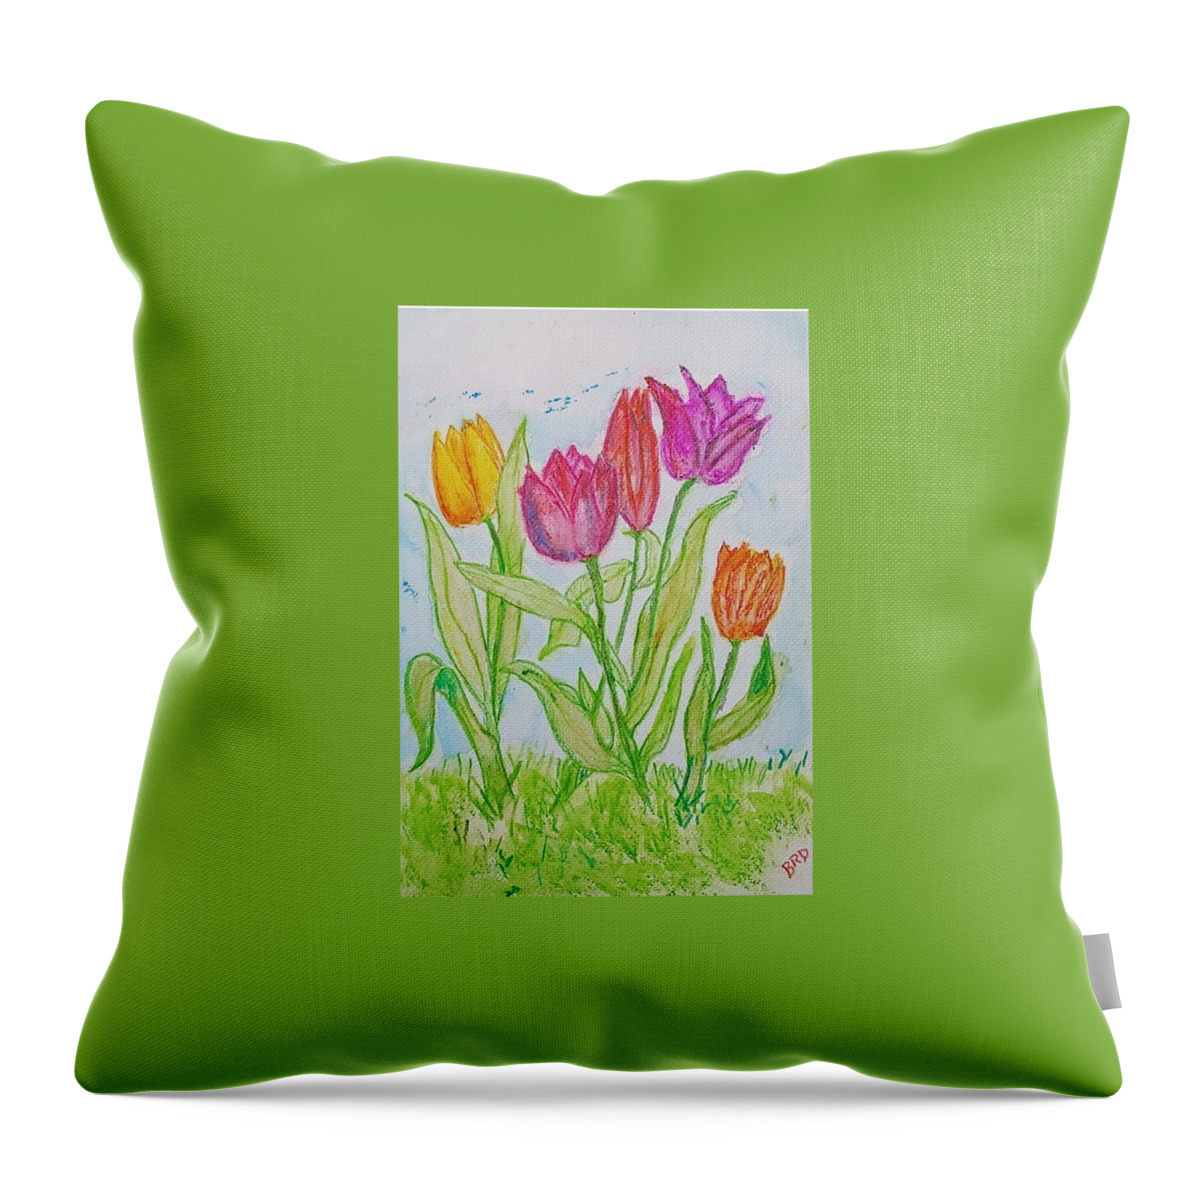 Tulips Throw Pillow featuring the painting Tulips by Branwen Drew